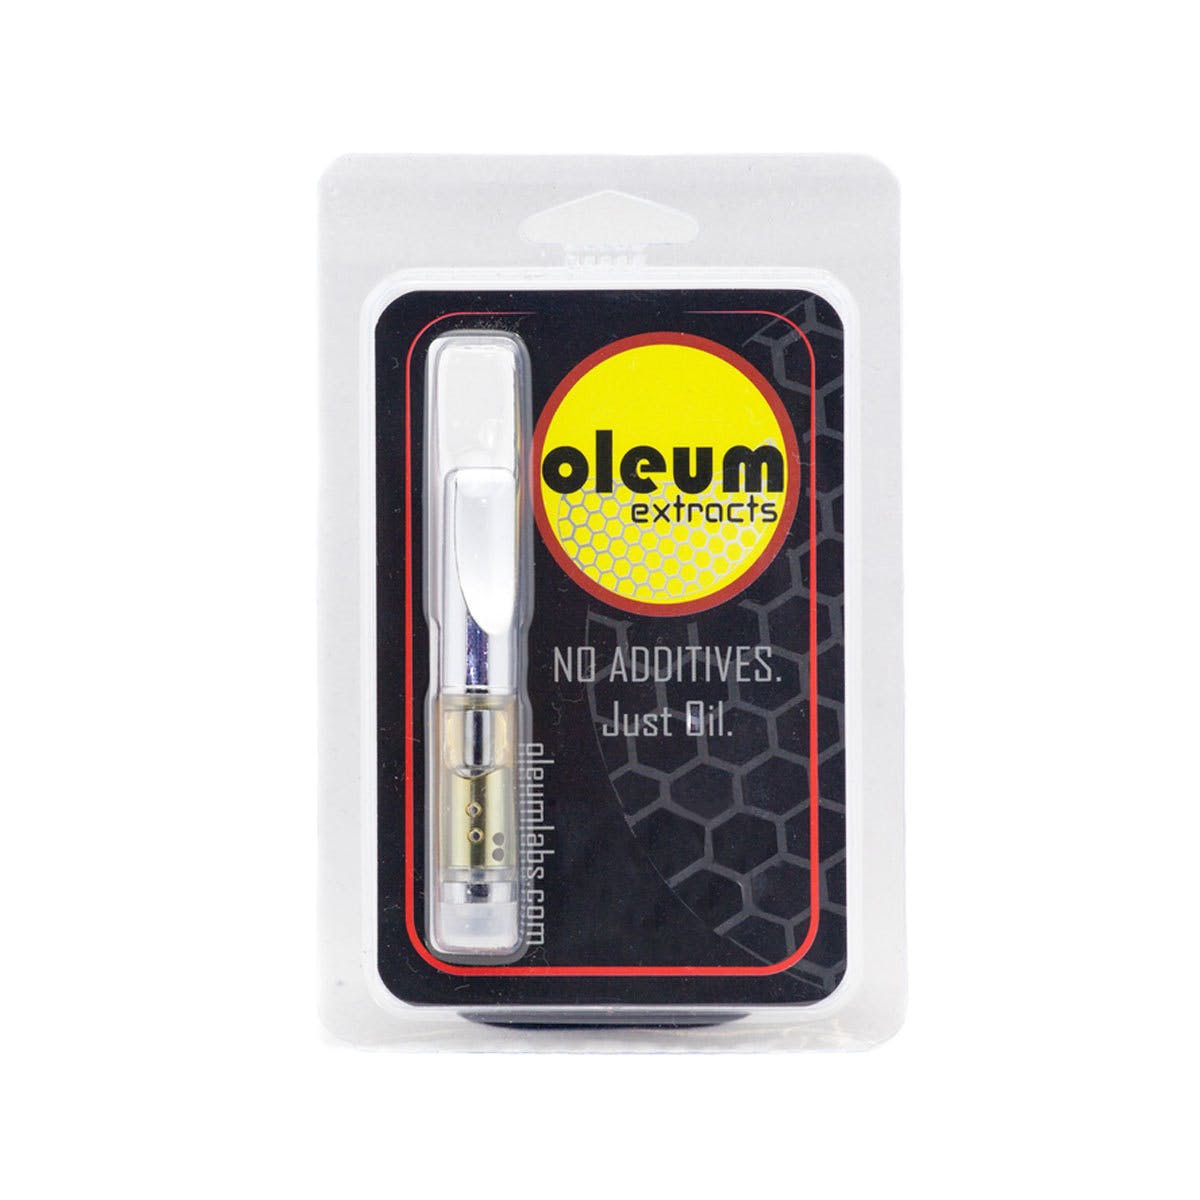 concentrate-oleum-extracts-white-rhino-distillate-cartridge